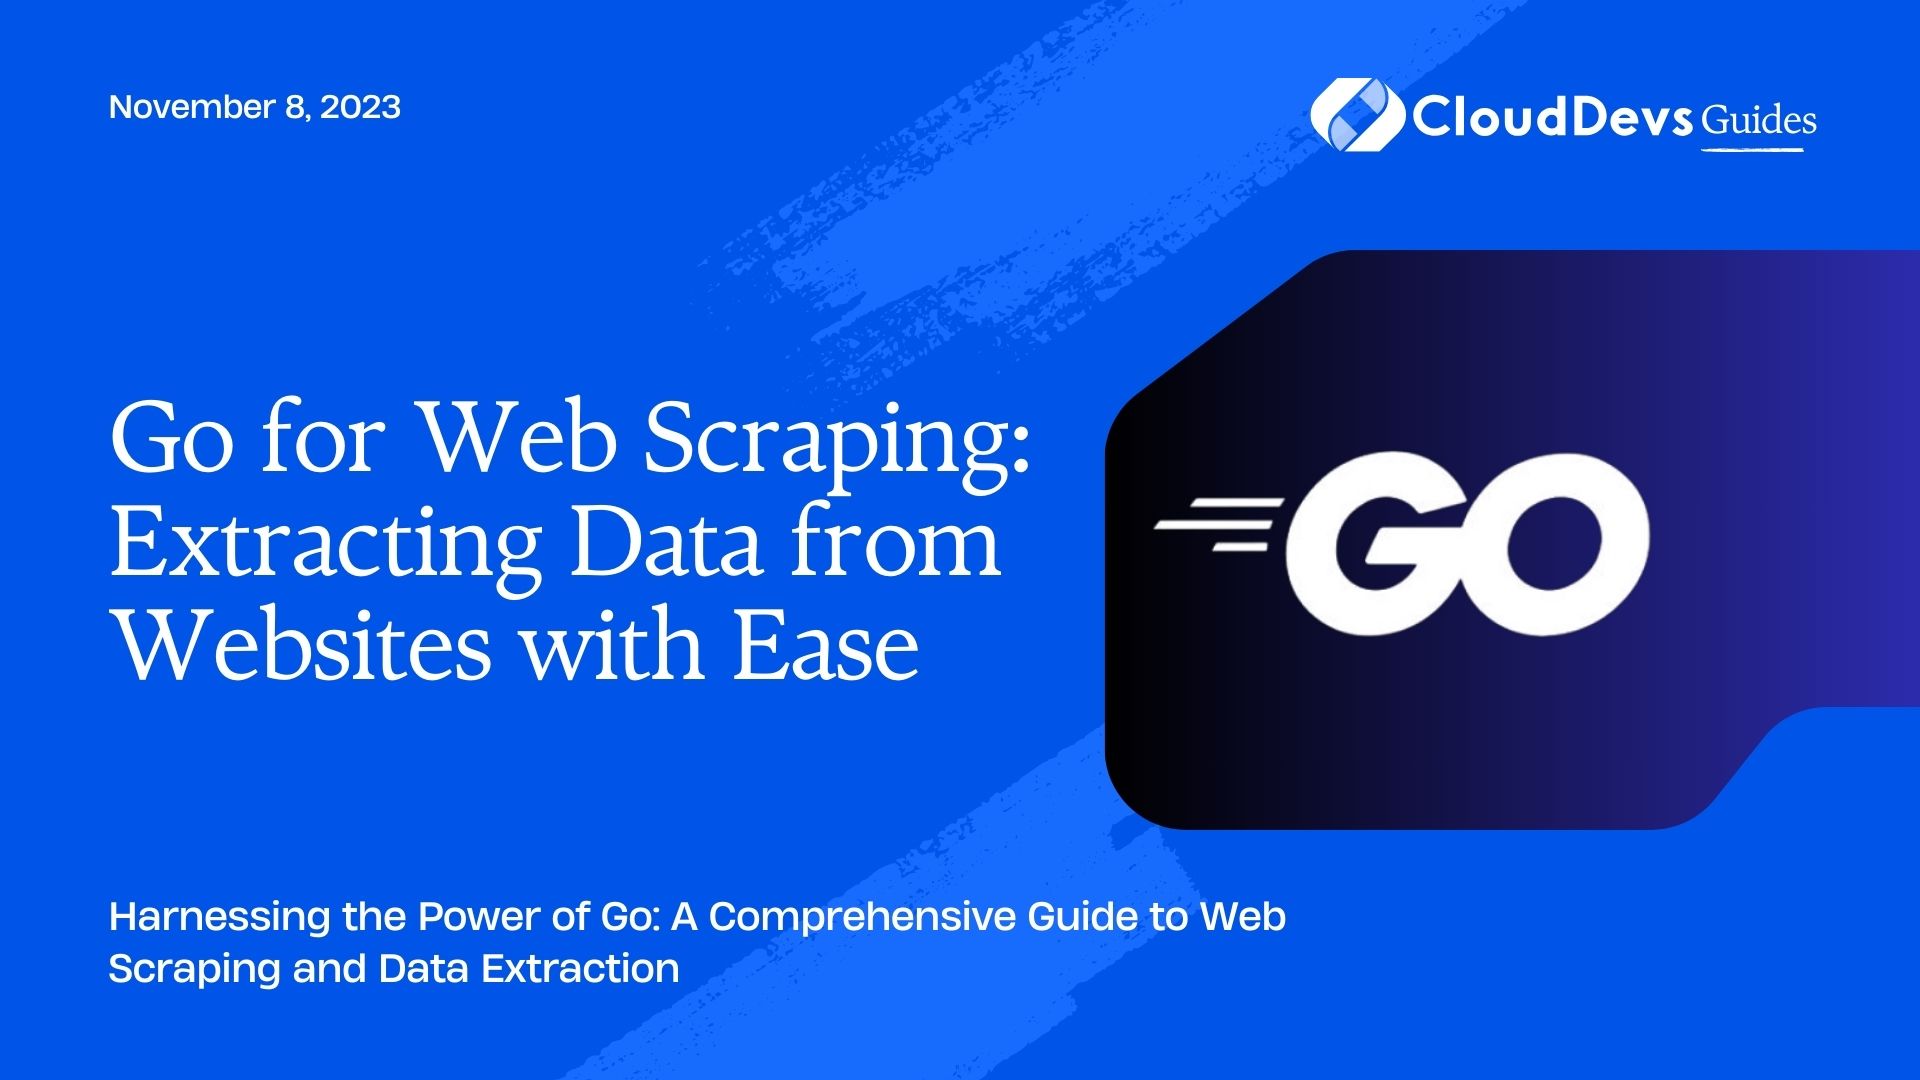 Go for Web Scraping: Extracting Data from Websites with Ease